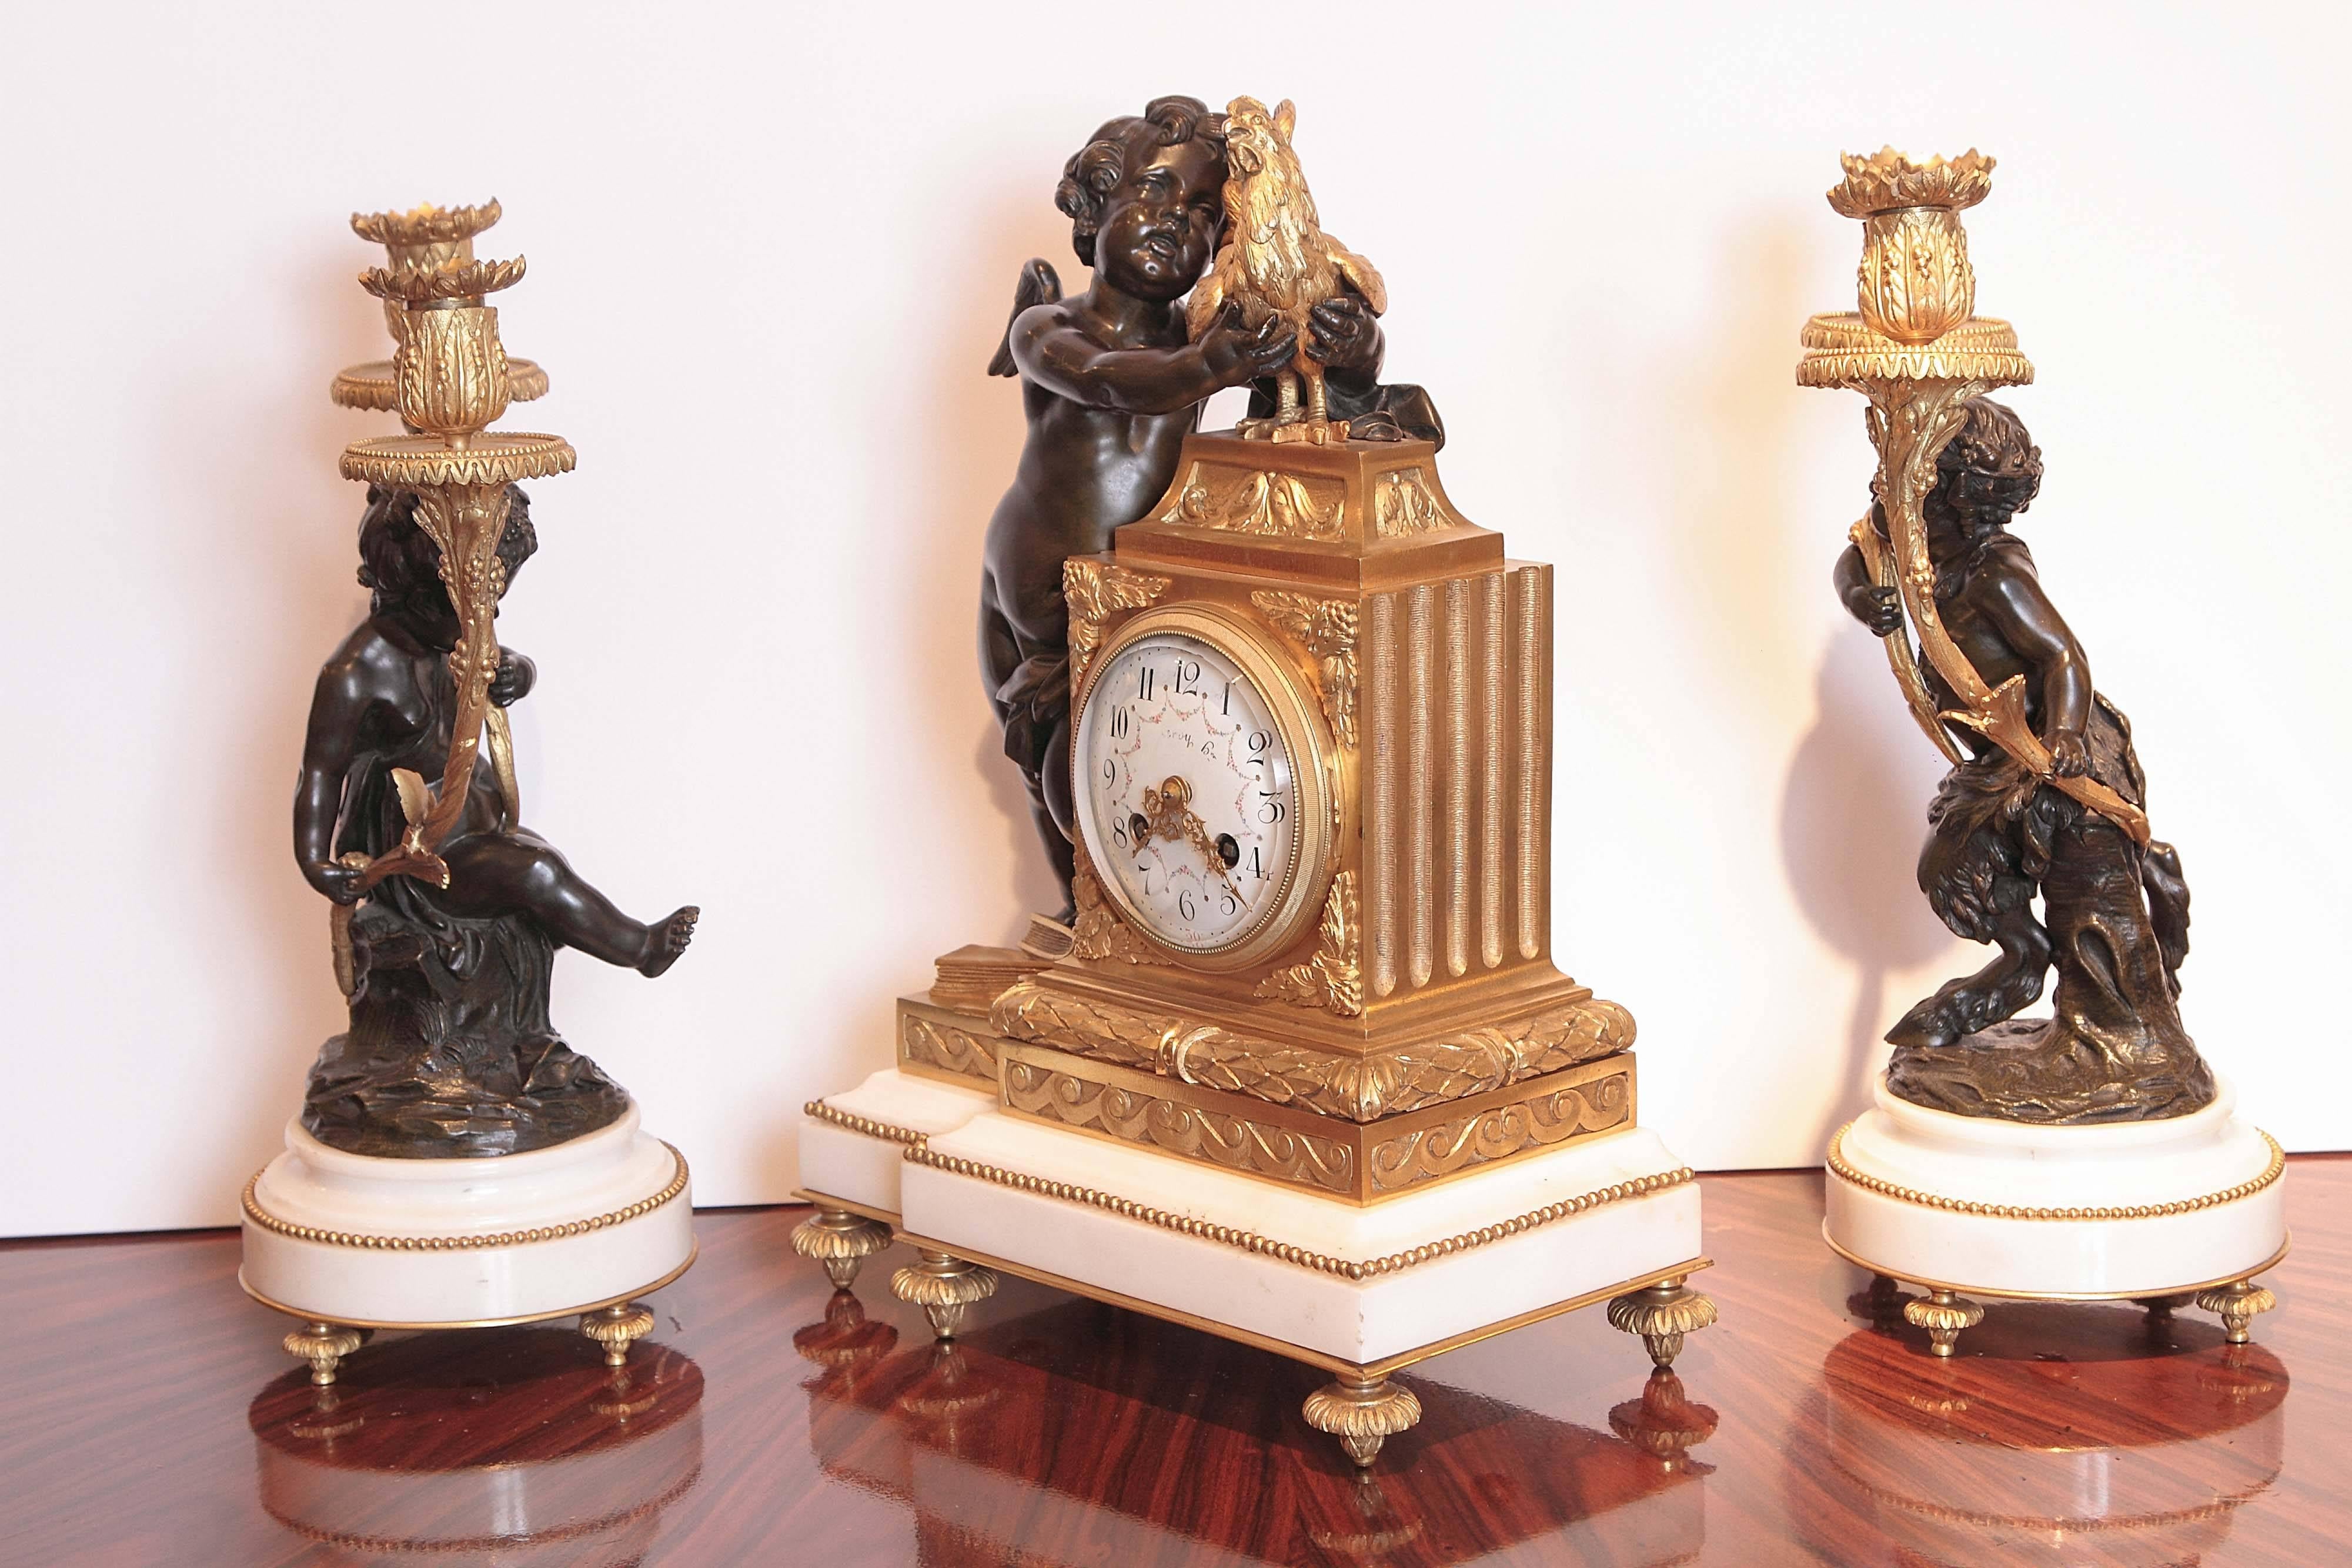 Very fine 19th century French clock set by A.D Mougin.